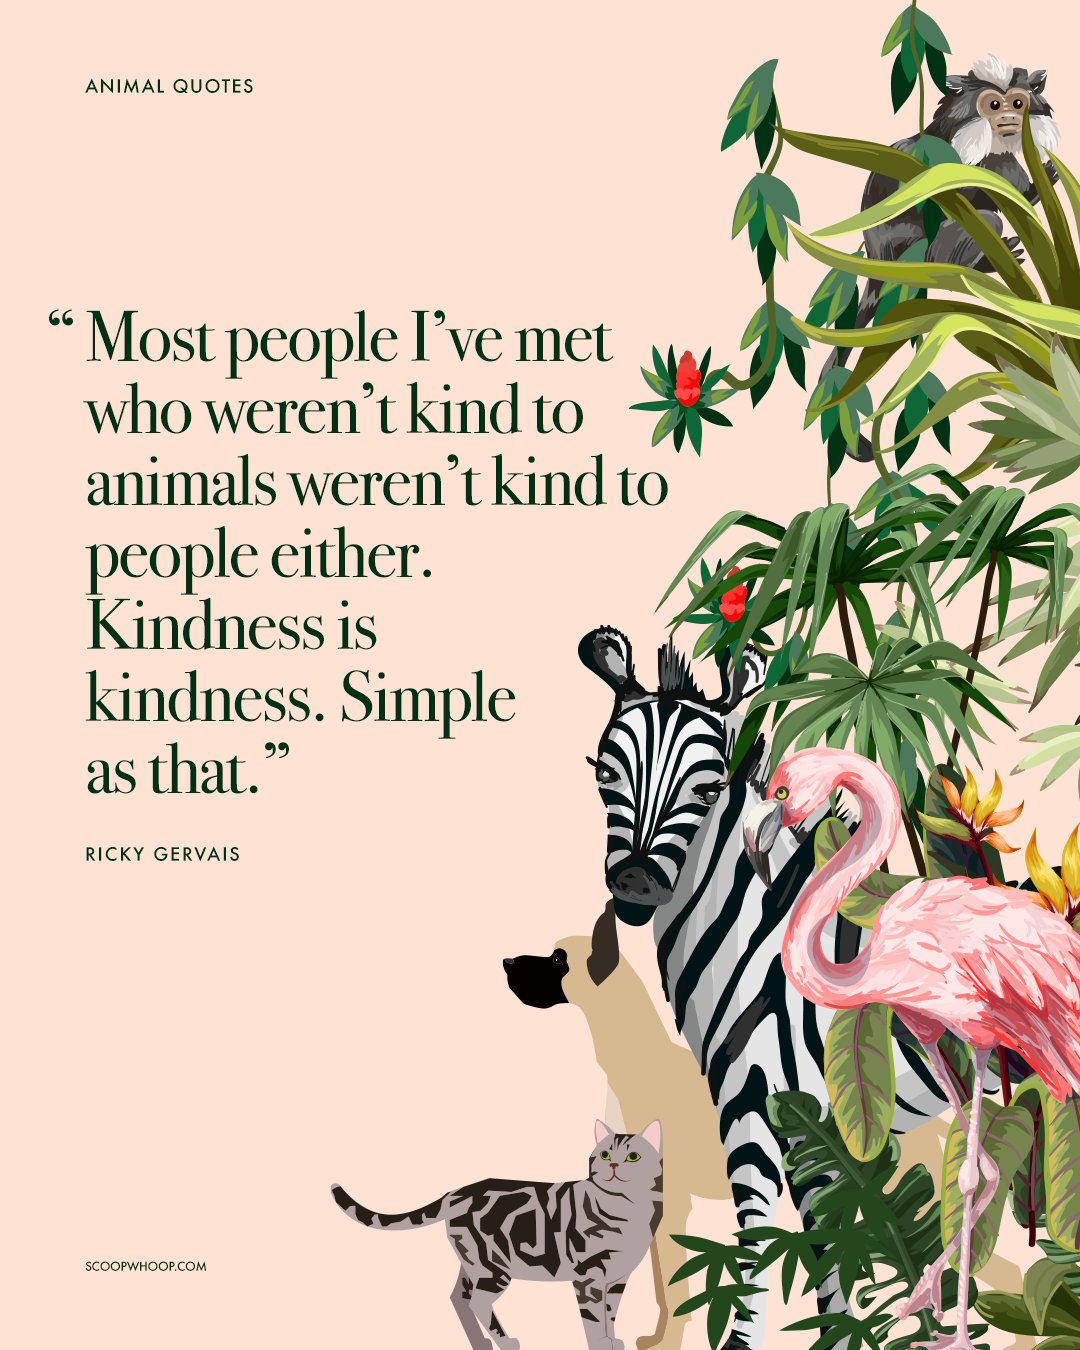 22 Quotes On Animals That Will Teach You To Co-Exist With Compassion